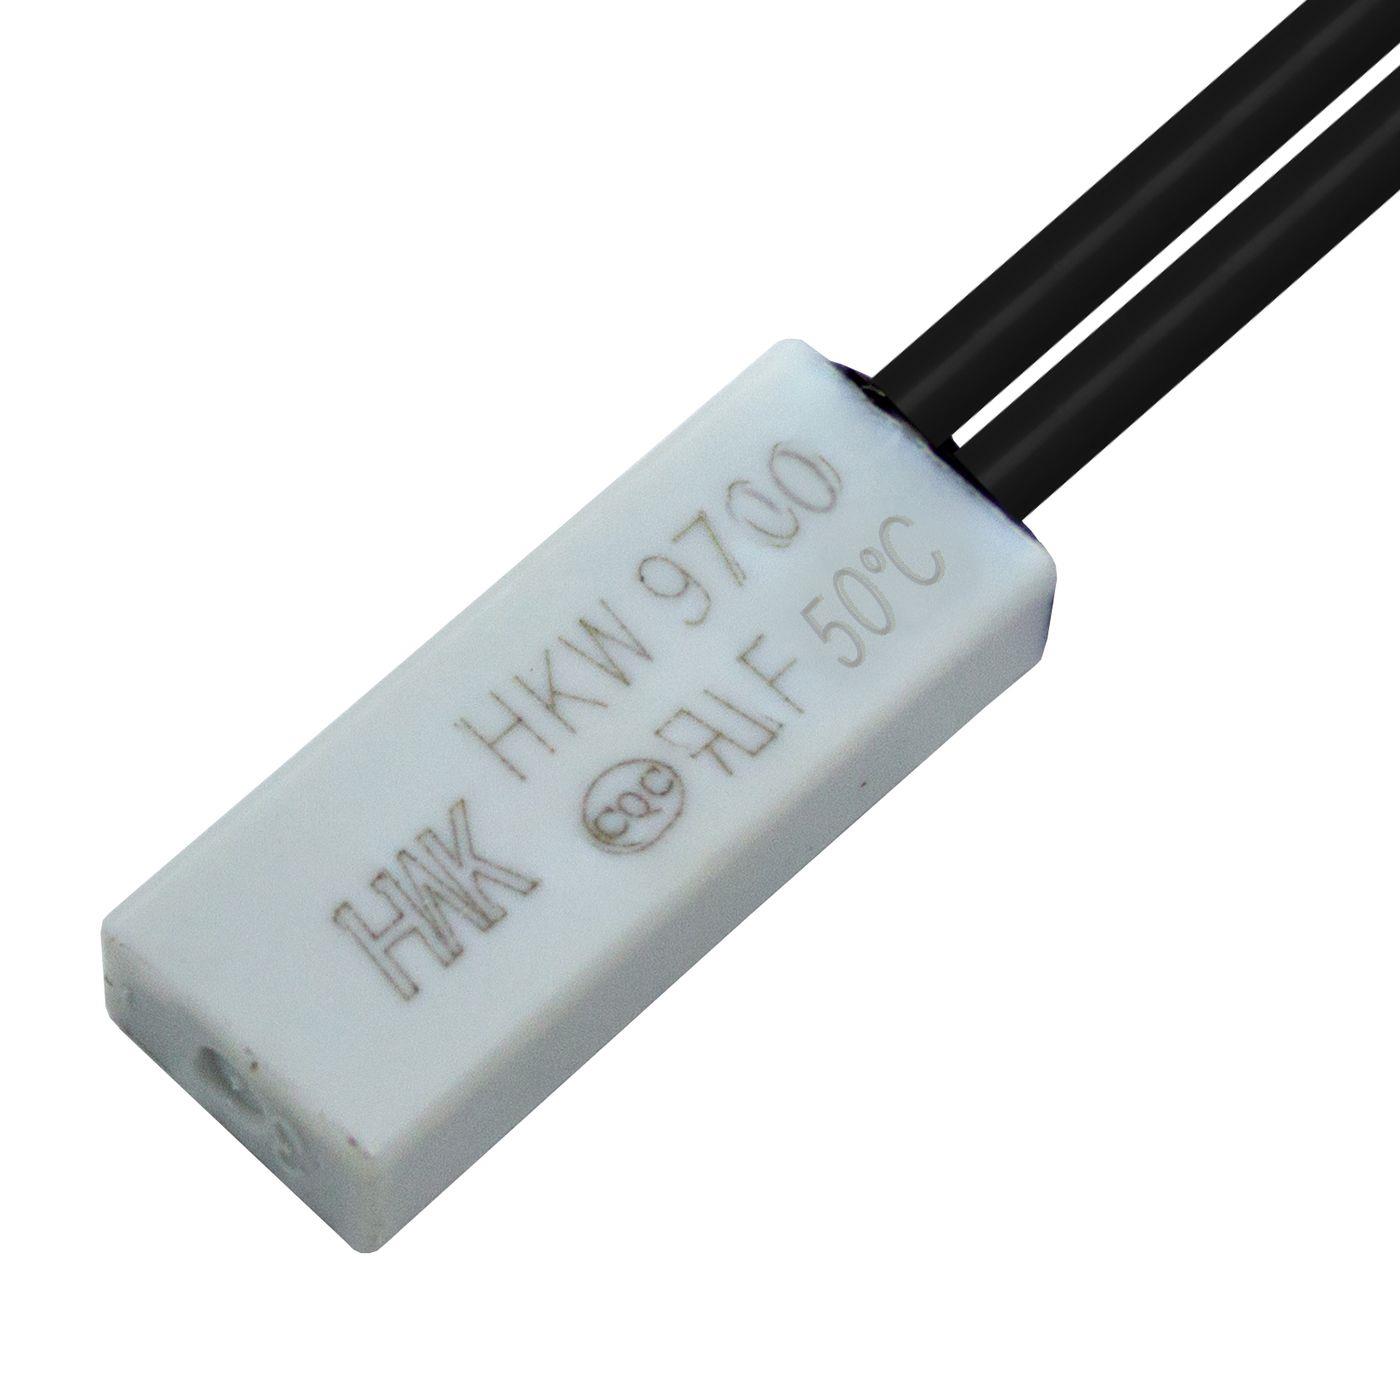 Thermal switch 50°C NO contact 250V 5A Cable Temperature switch thermostat Bimetal Thermal protection